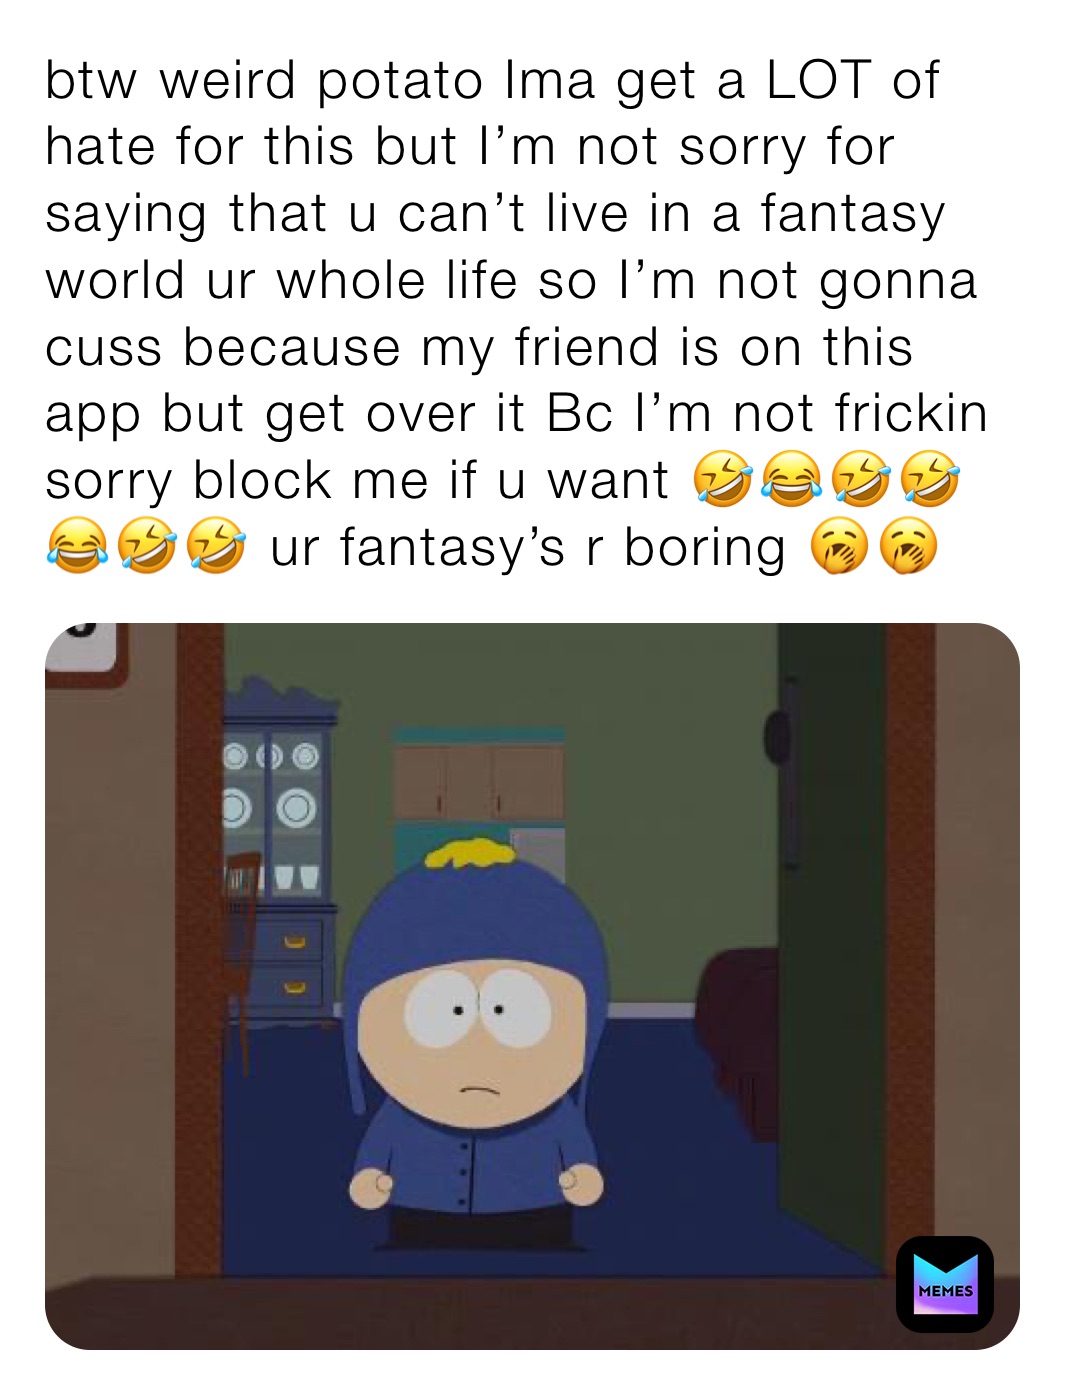 btw weird potato Ima get a LOT of hate for this but I’m not sorry for saying that u can’t live in a fantasy world ur whole life so I’m not gonna cuss because my friend is on this app but get over it Bc I’m not frickin sorry block me if u want 🤣😂🤣🤣😂🤣🤣 ur fantasy’s r boring 🥱🥱